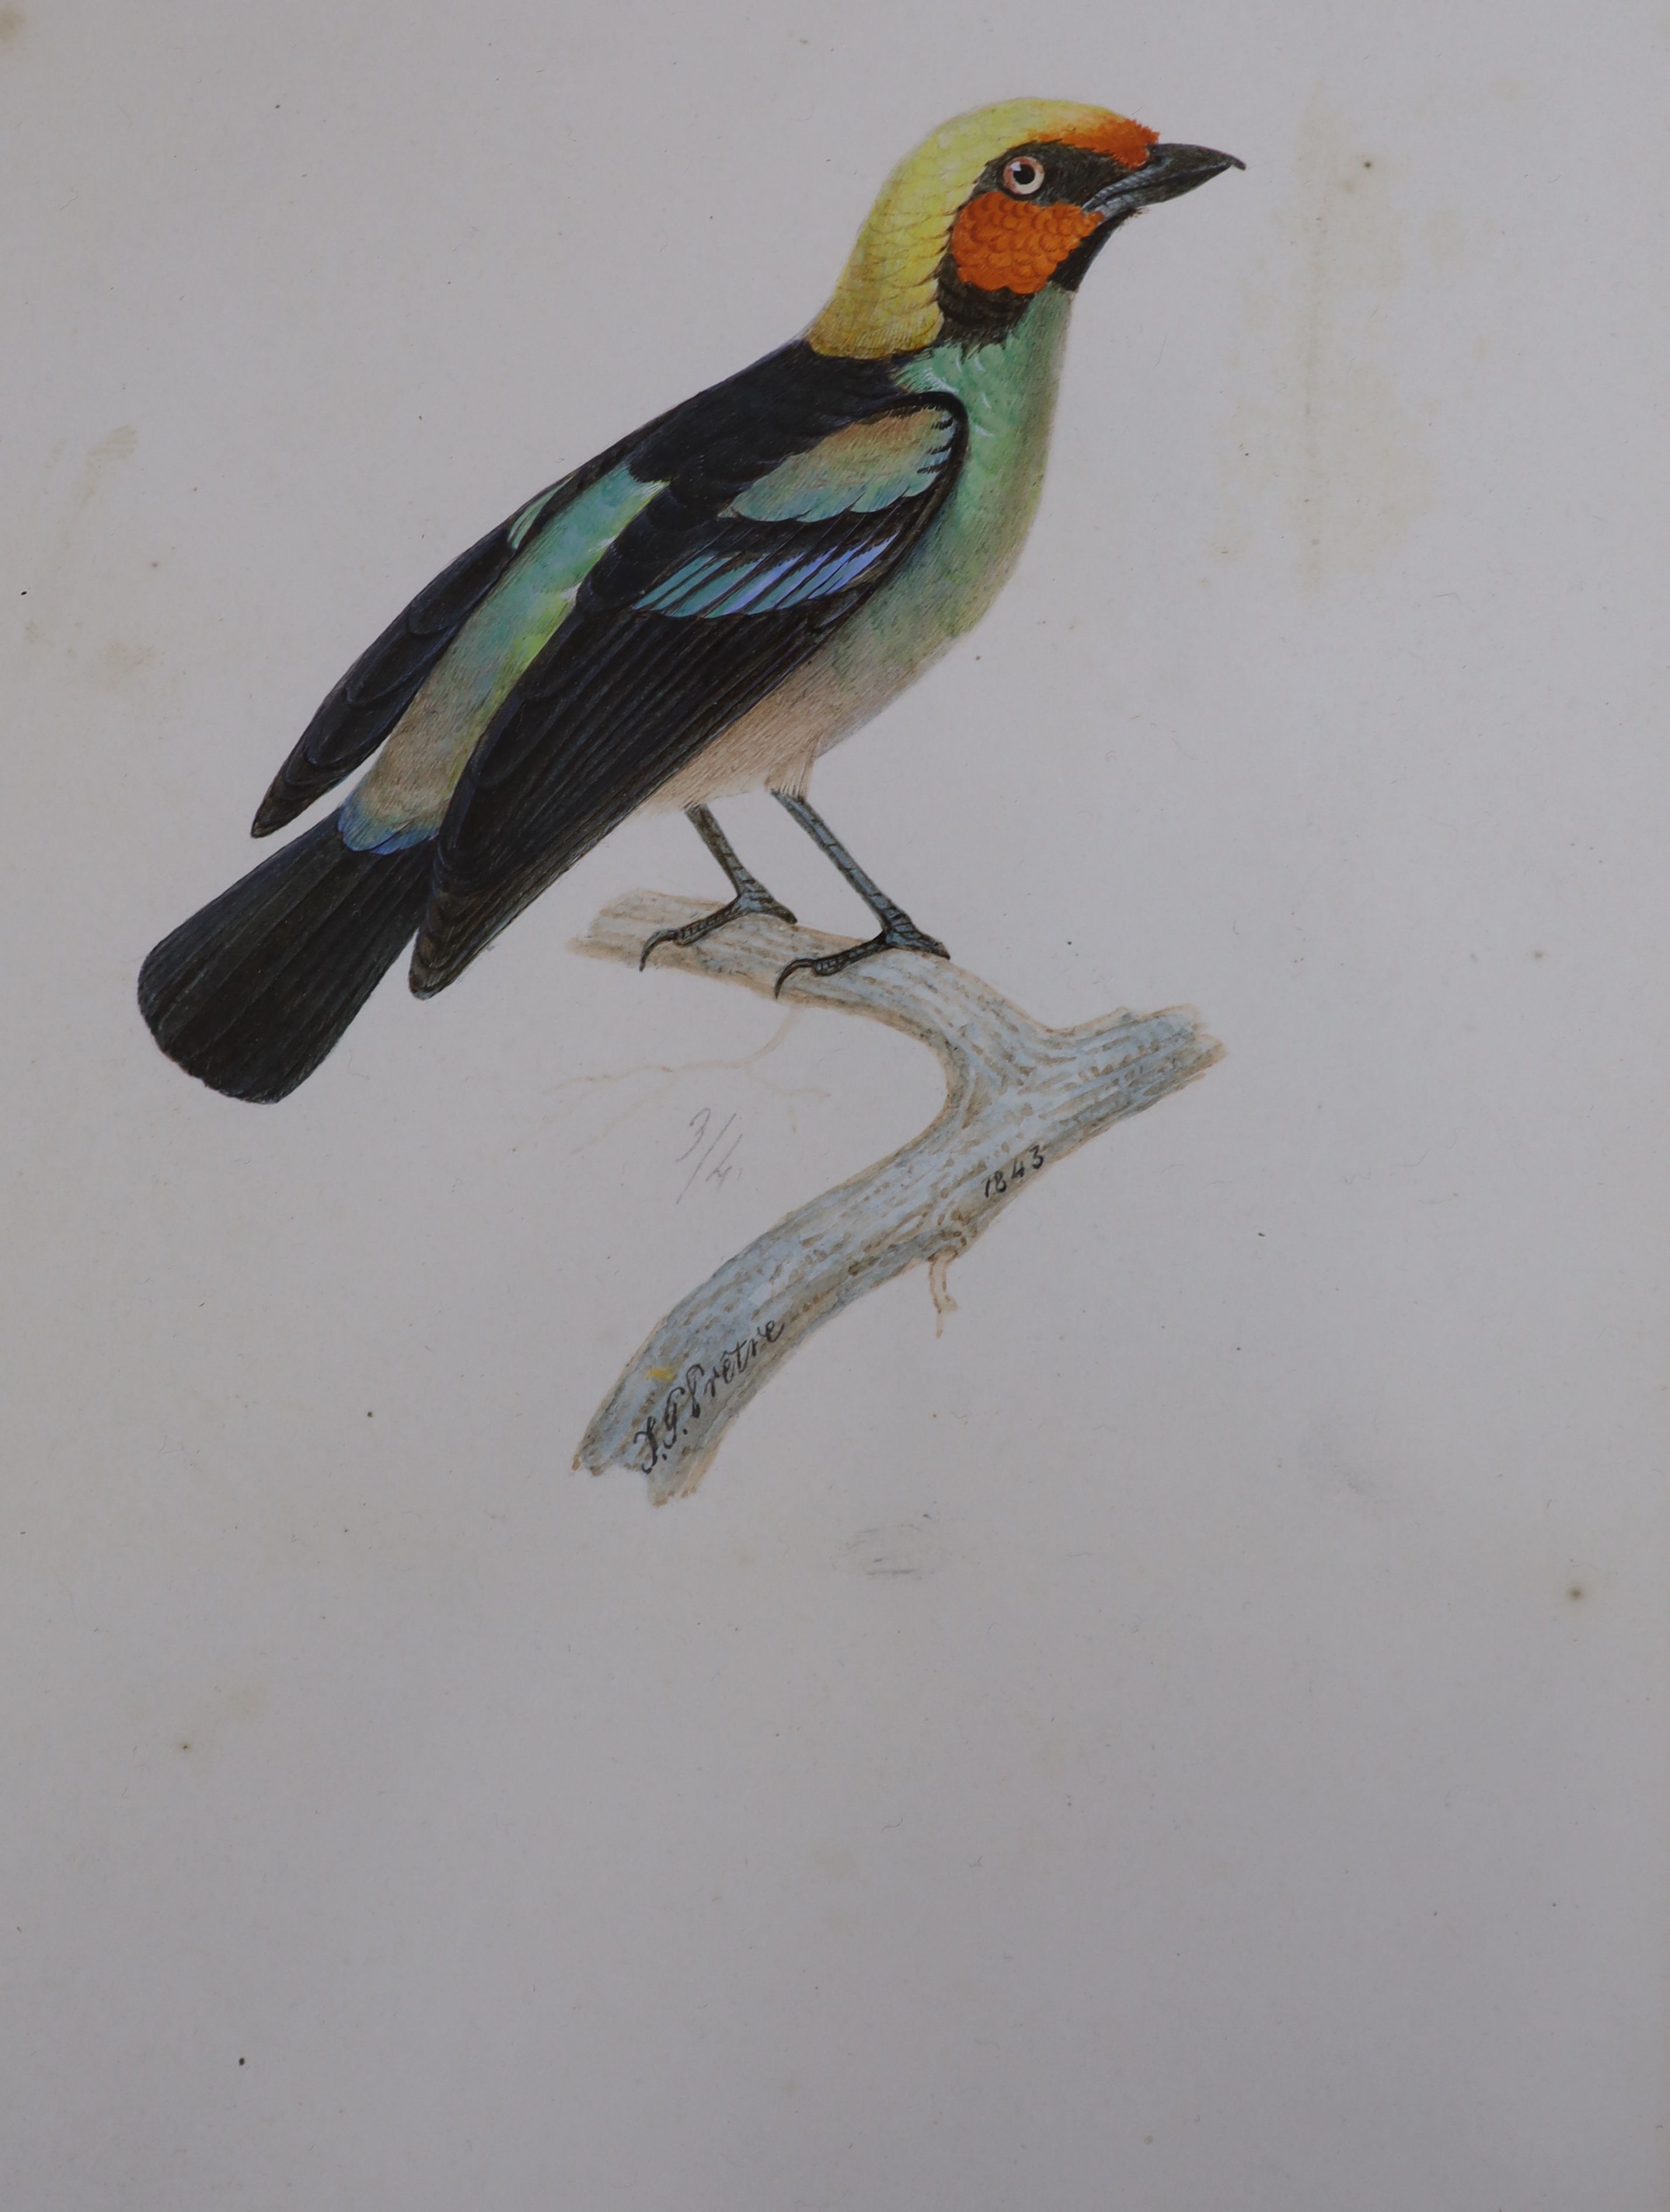 Jean-Gabriel Prêtre (1768-1849), four watercolours, Studies of exotic birds, signed and dated 1873, 18 x 12cm and a set of four coloured engravings of birds, 25 x 20cm